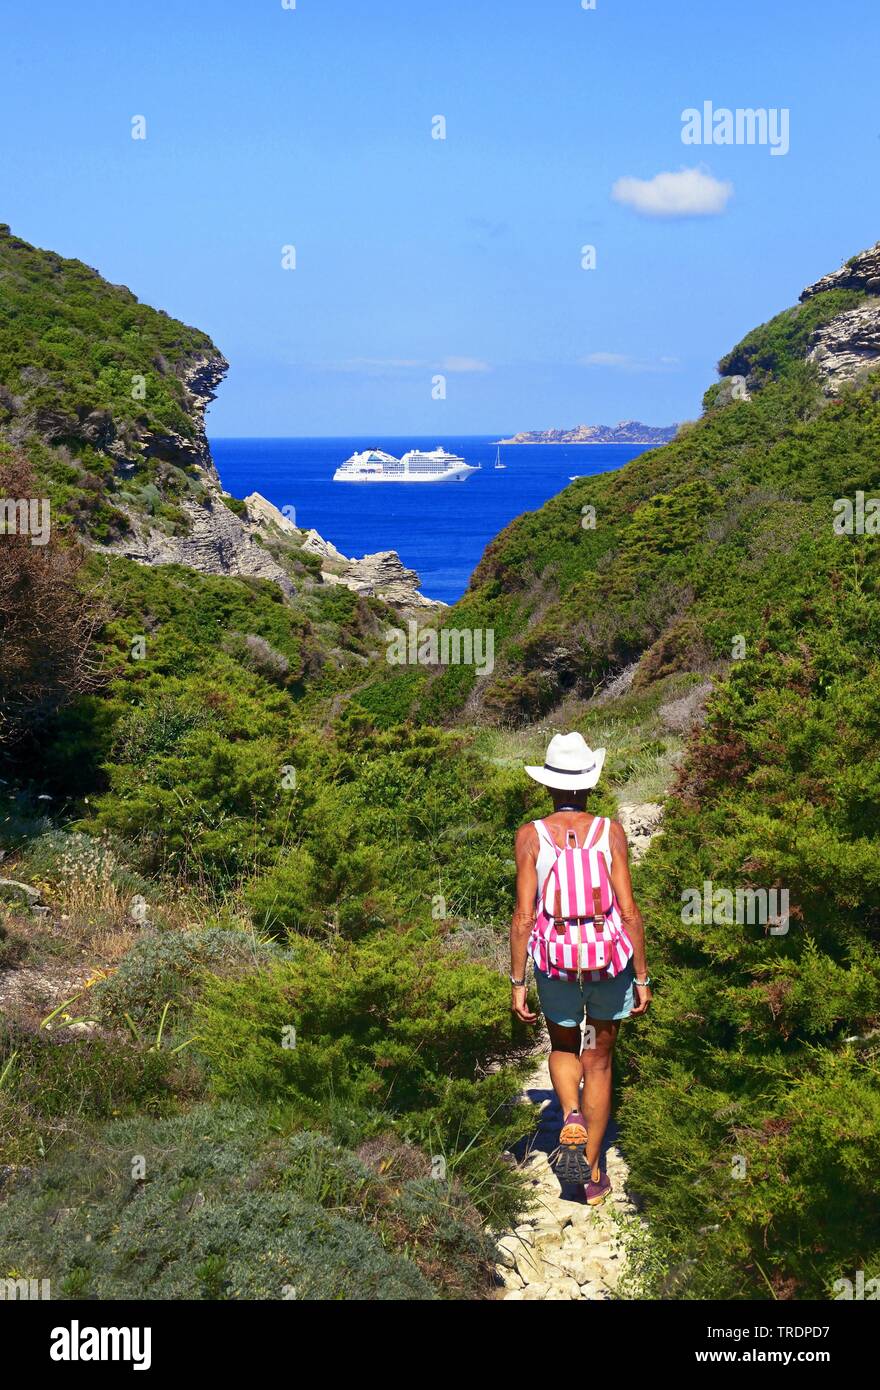 footpath at the rocky coast, cruise liner in background, France, Corsica, Bonifacio Stock Photo